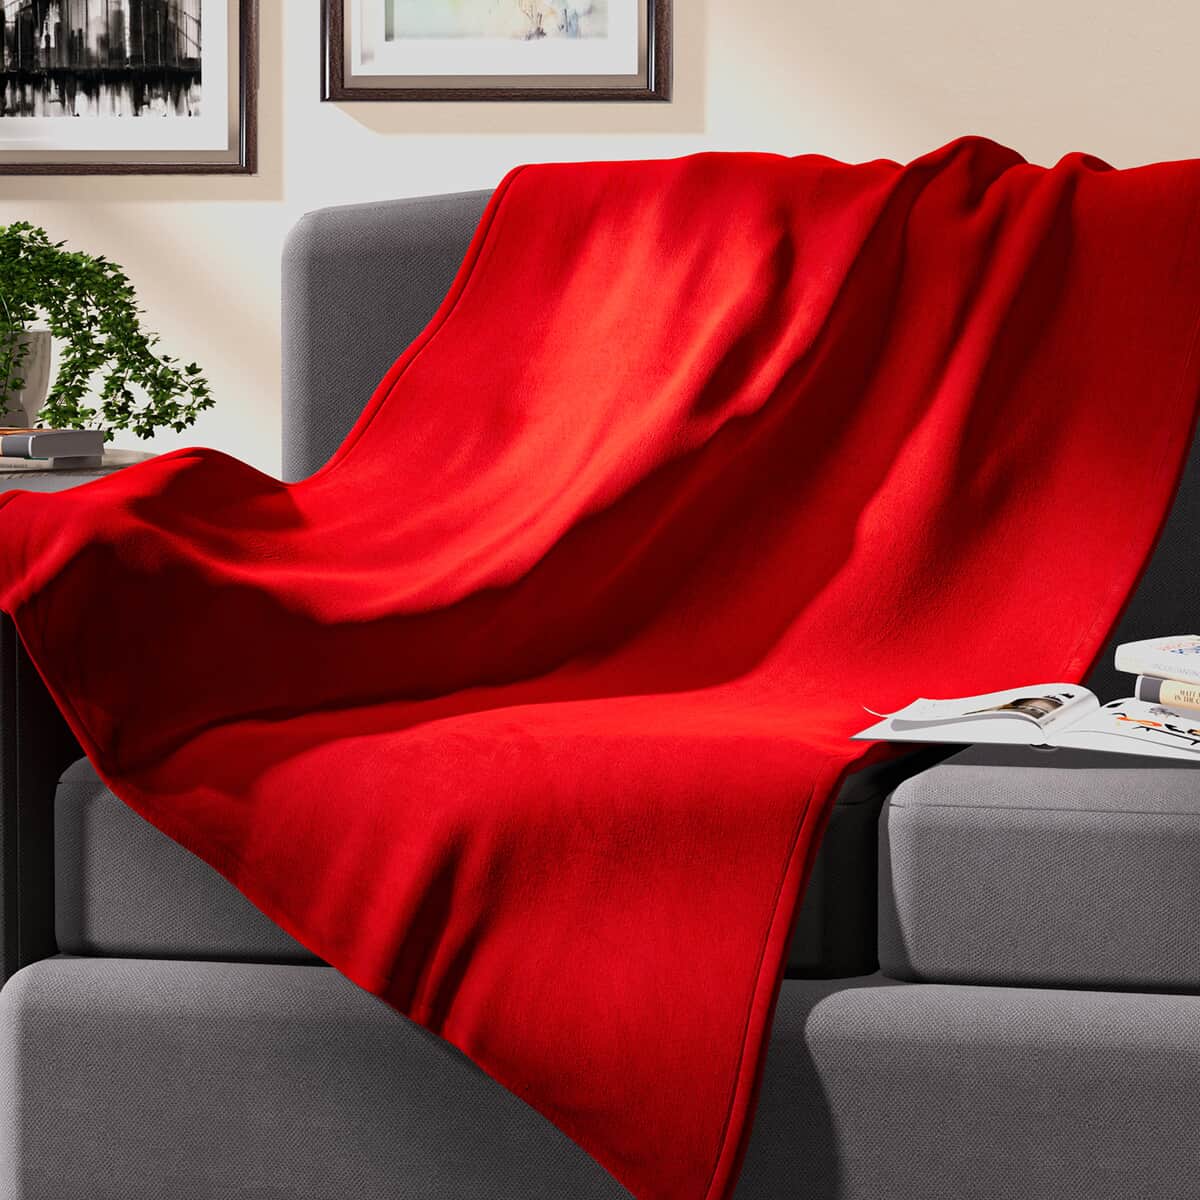 HOMESMART Toreador Solid Coral Fleece Warmth and Soft Blanket (50"x70") image number 0